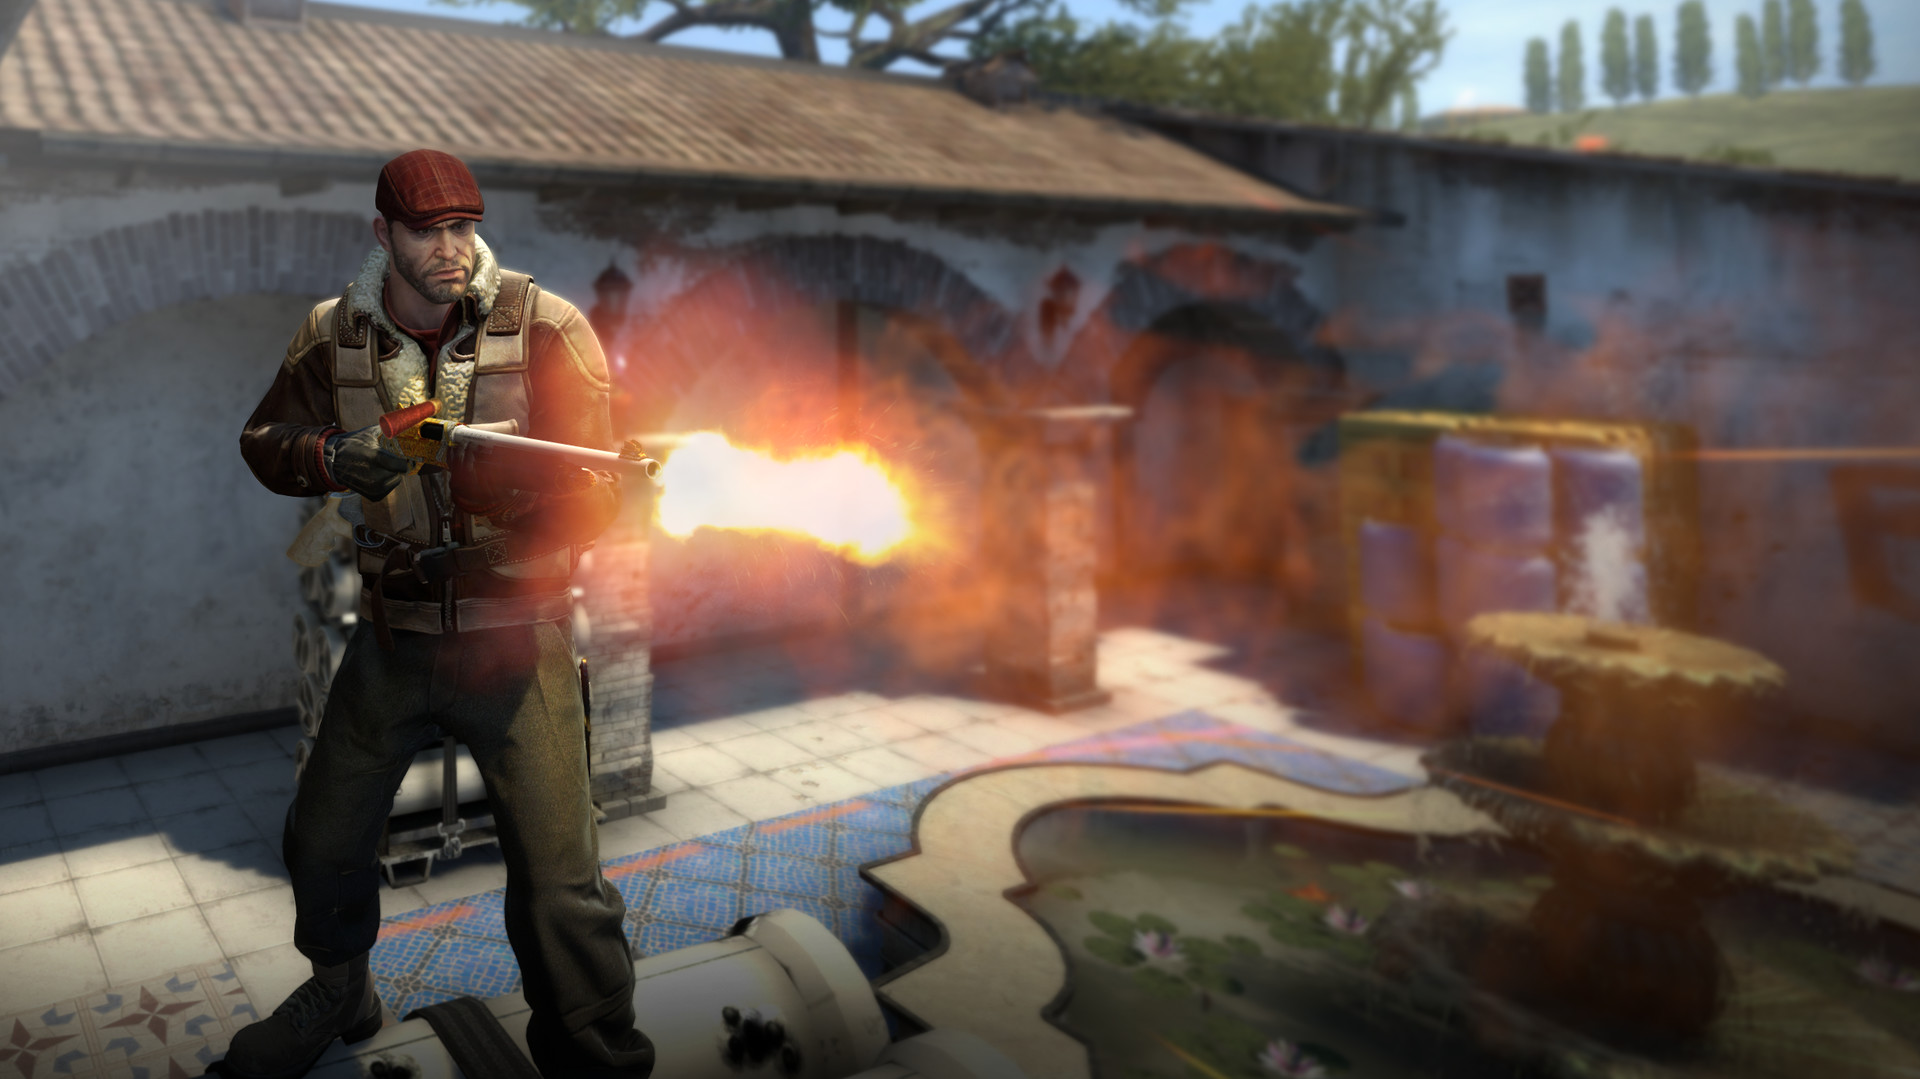 Counter Strike 2 Release Date, Beta Access, and More - Esports Illustrated